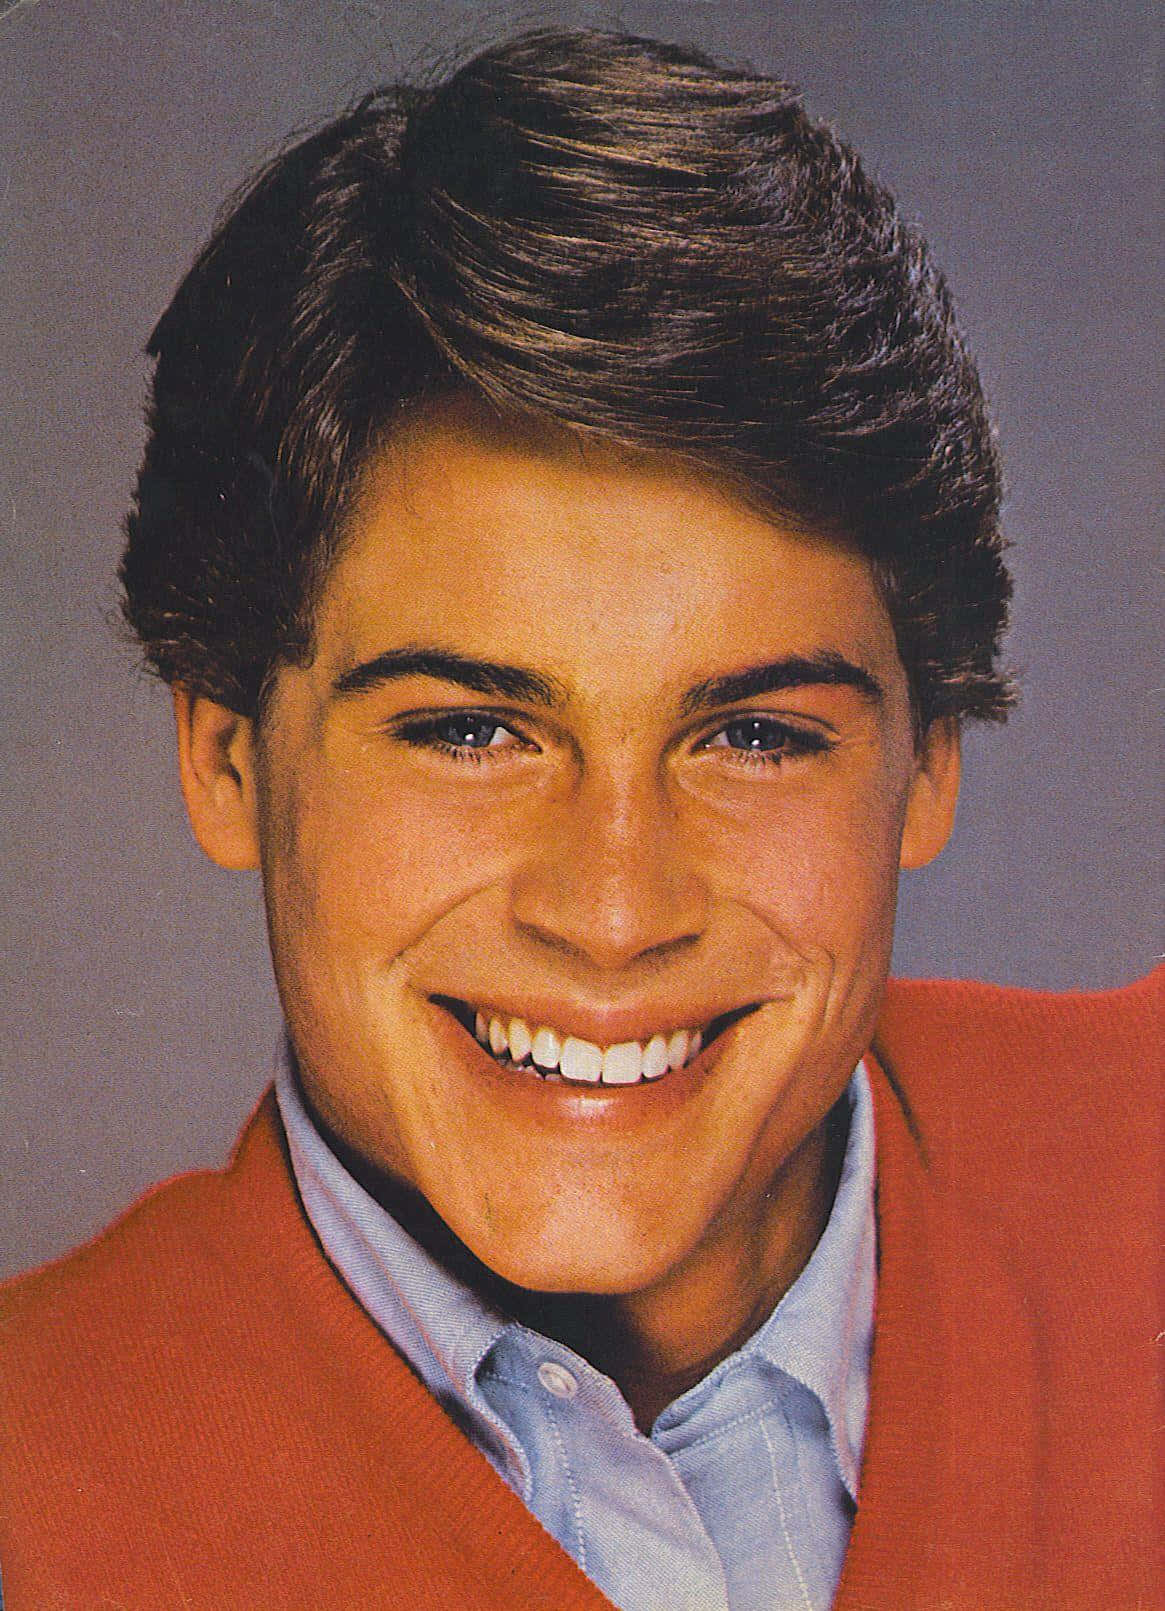 Actor Rob Lowe.